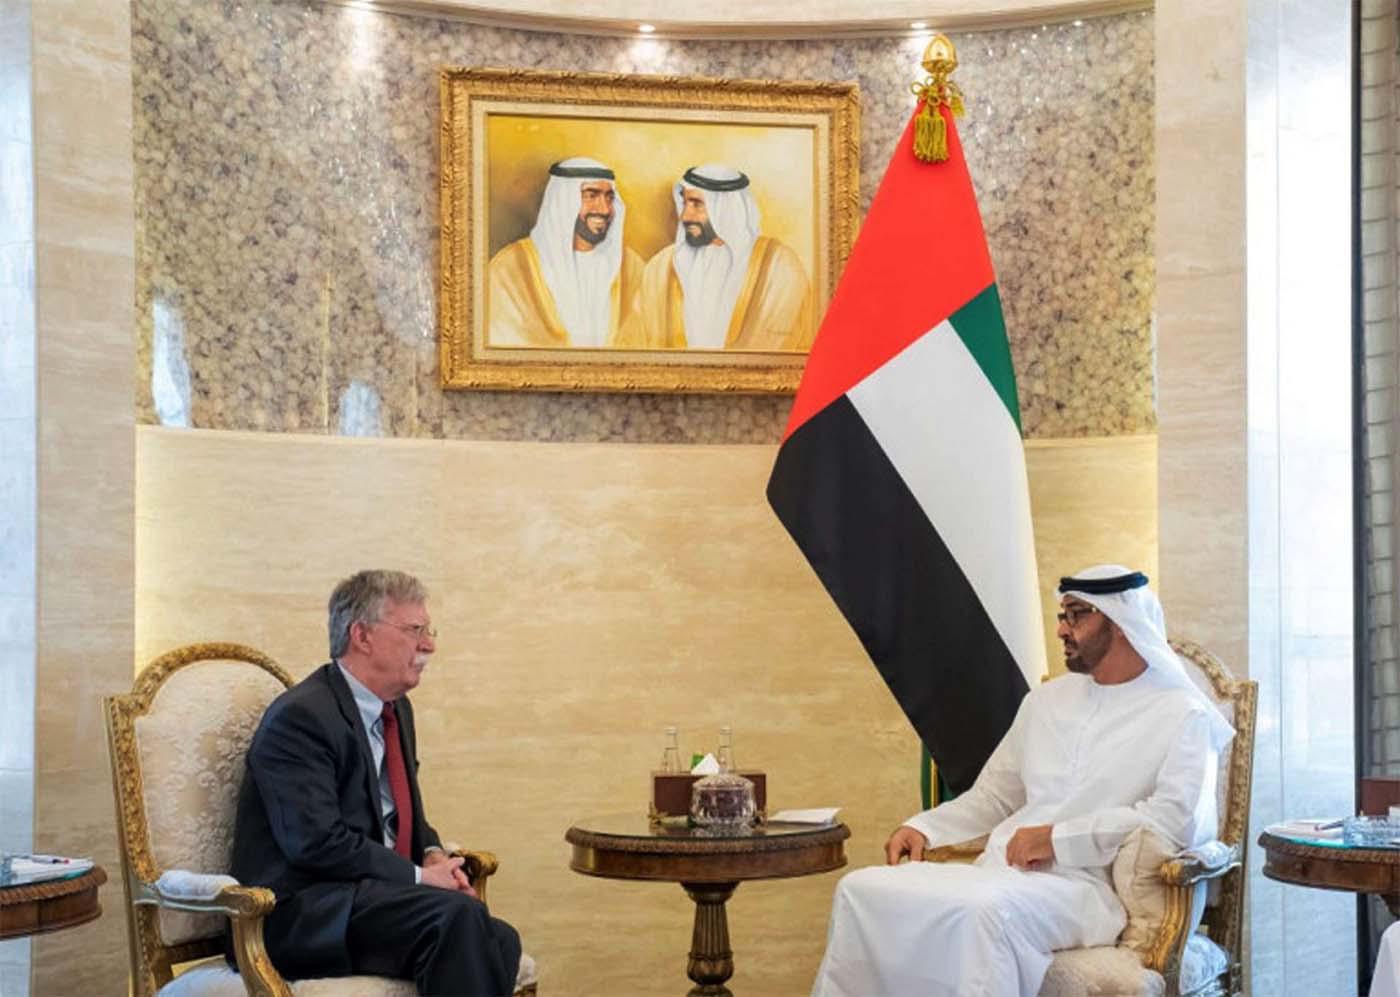 A closer US-UAE collaboration on defense and security matters